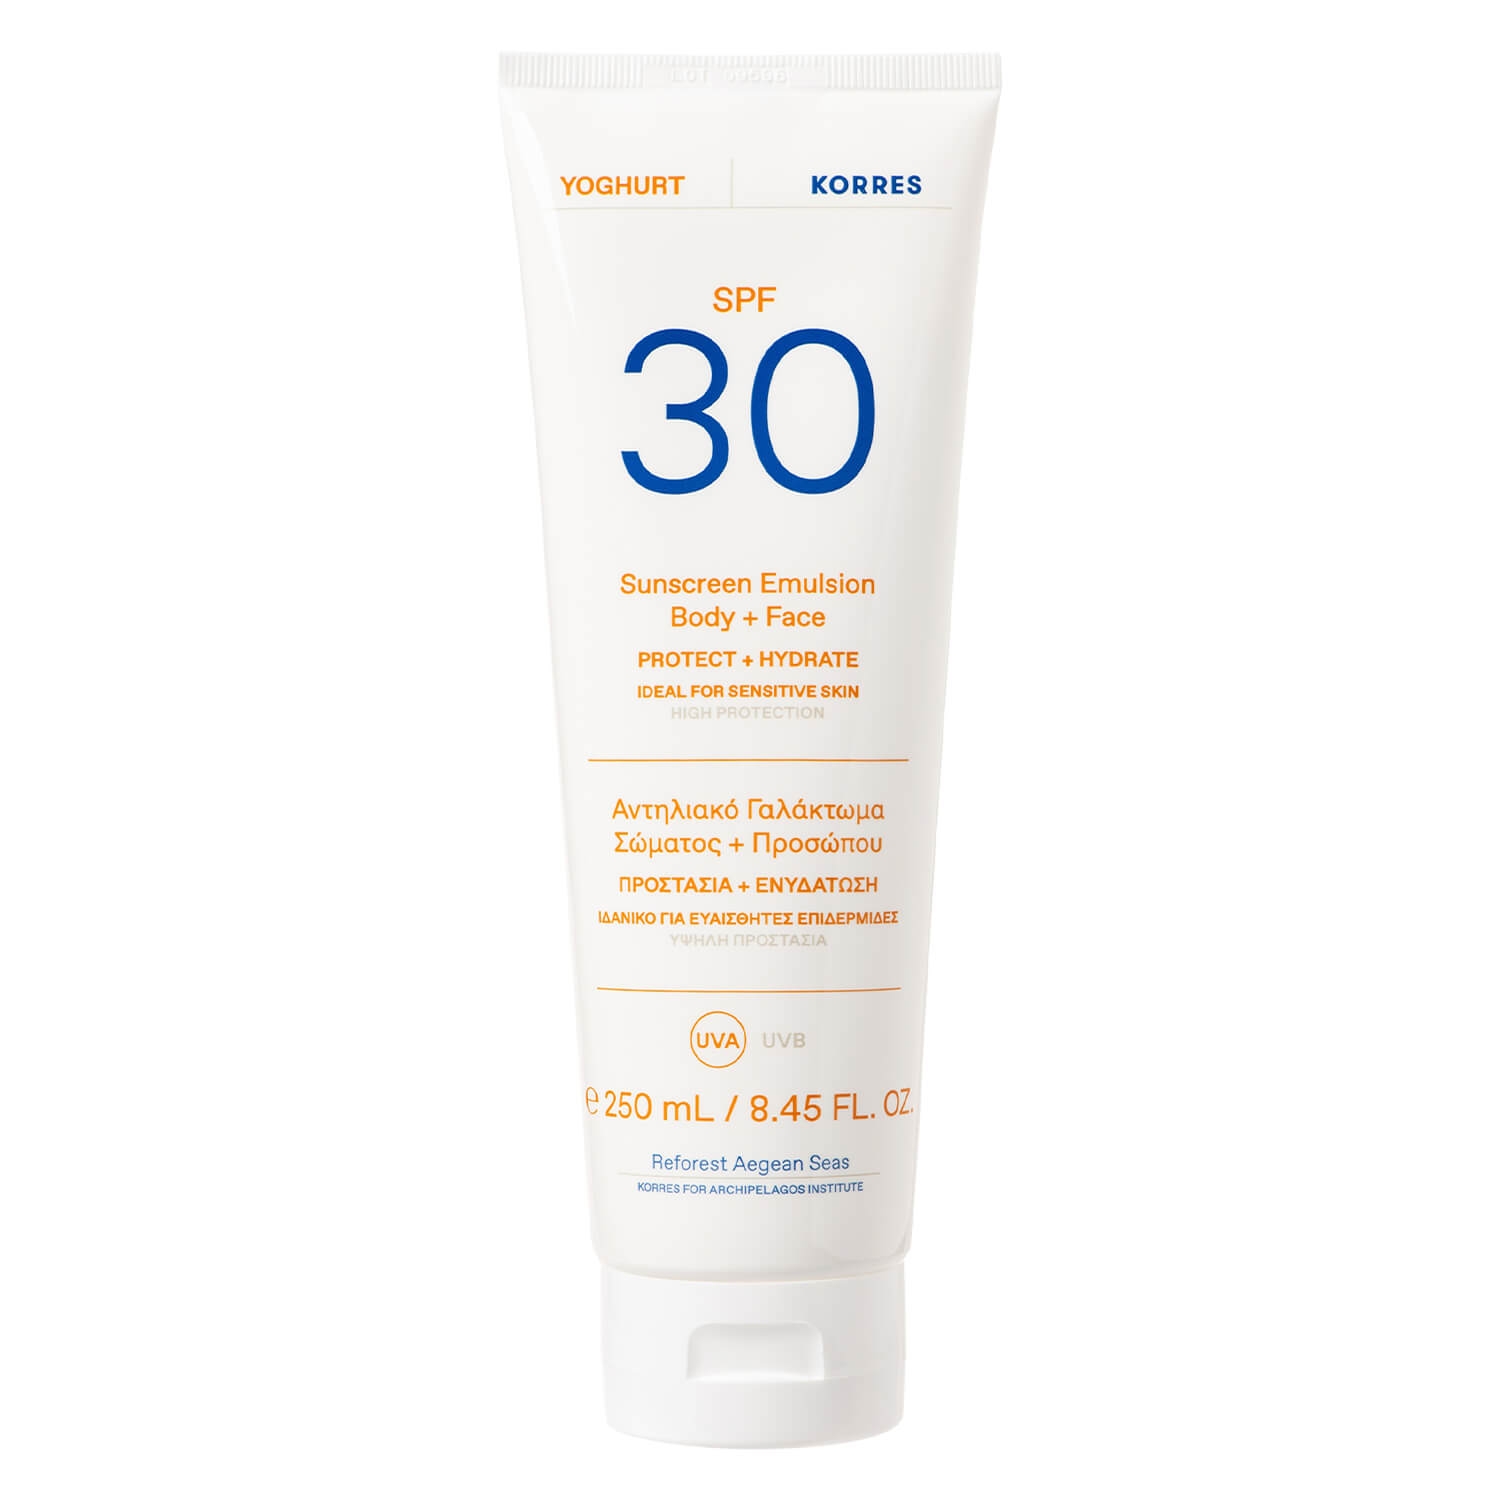 Product image from Korres Care - Yoghurt Sunscreen Emulsion Body + Face SPF30